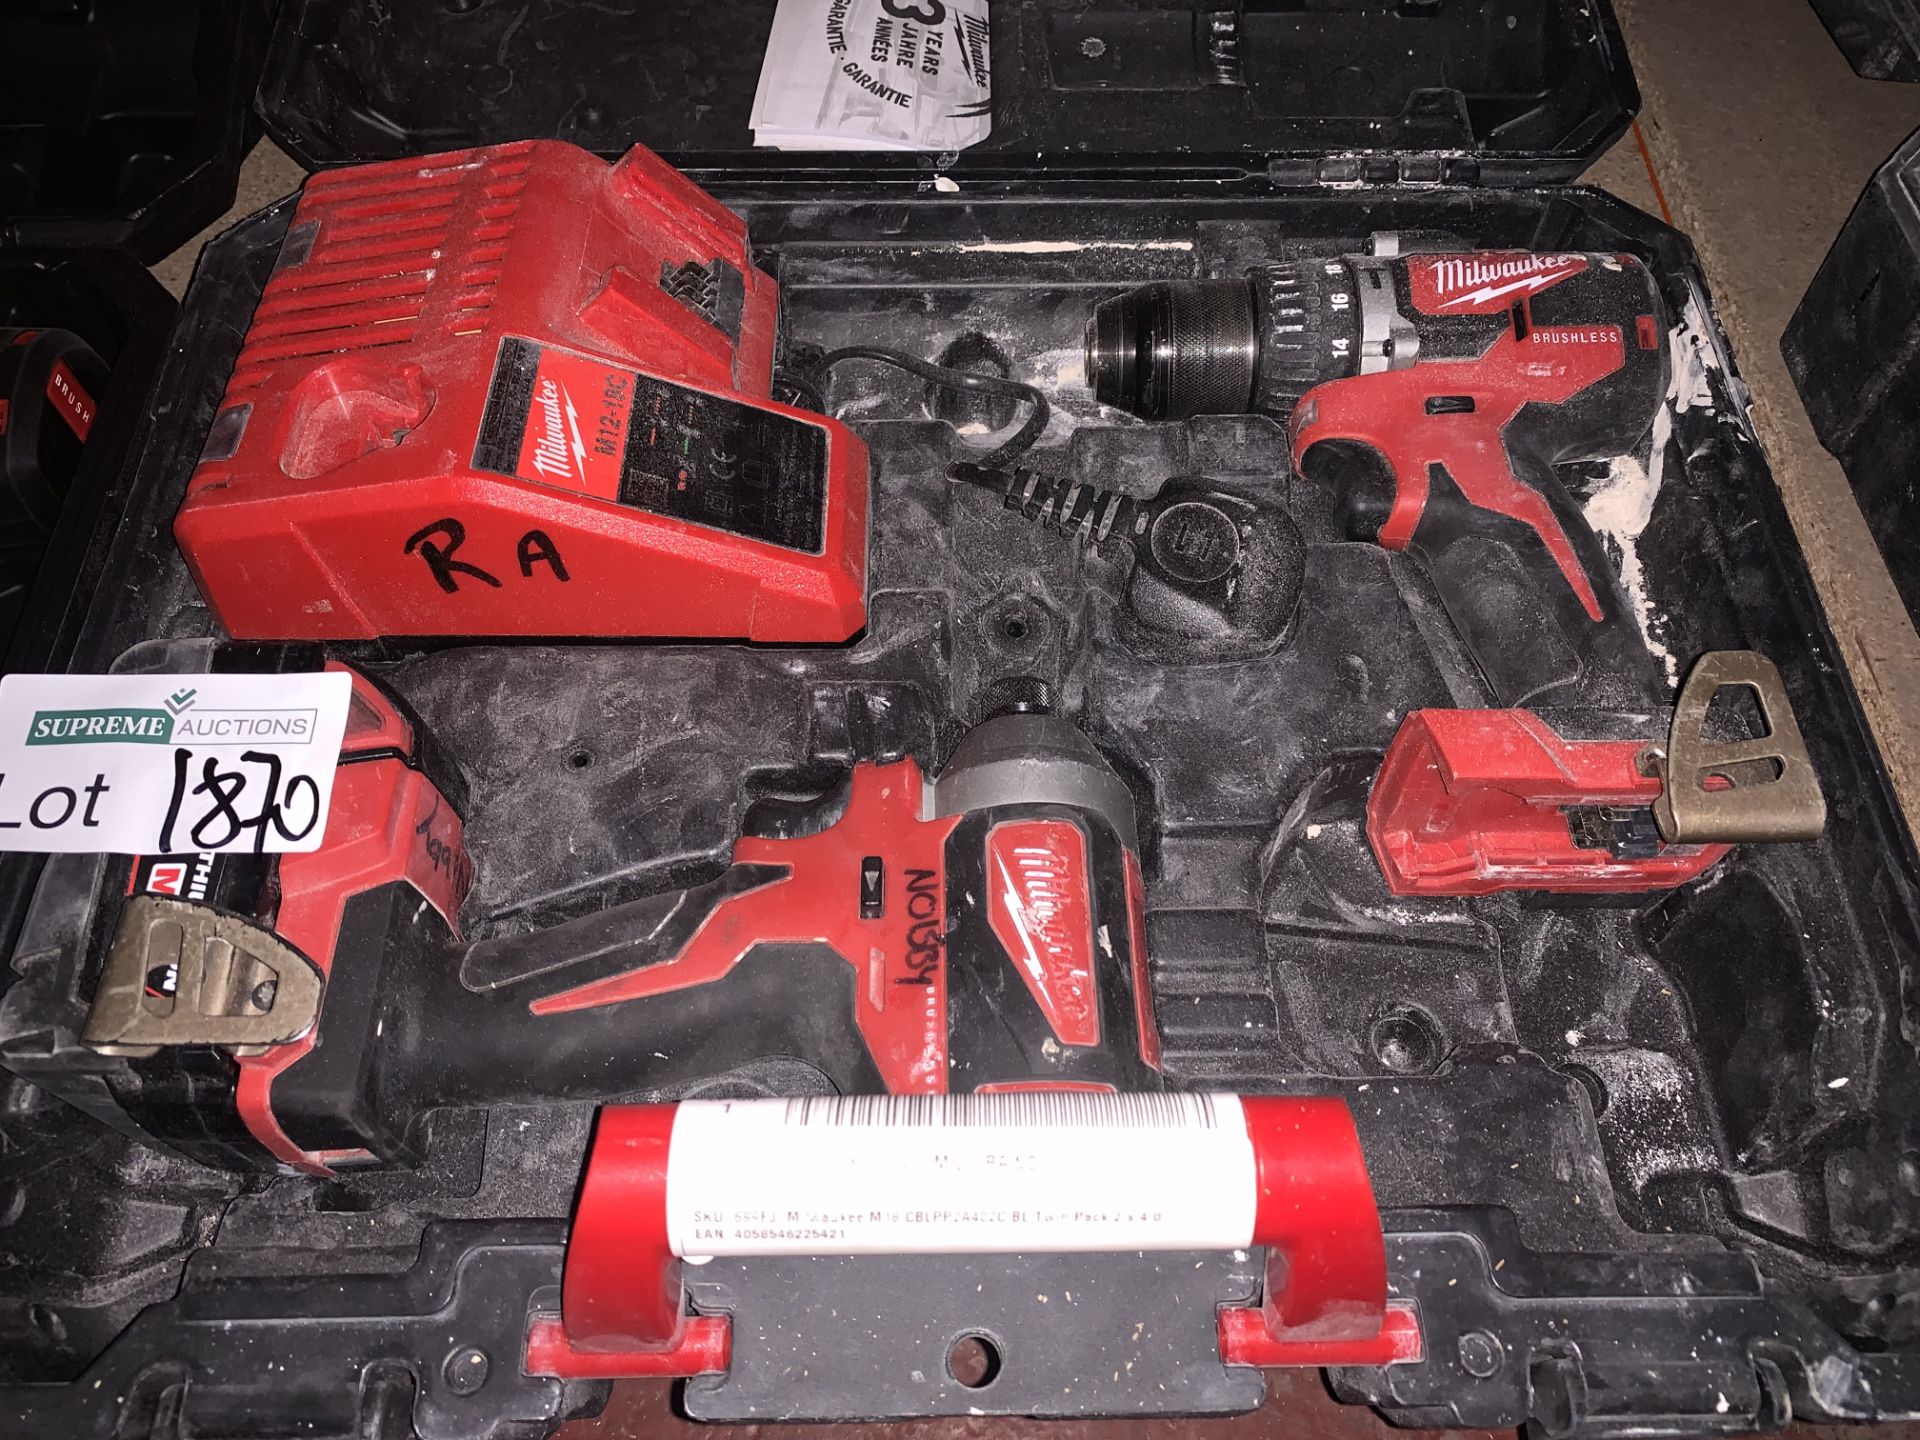 Milwaukee Set Drill and IMPACT DRIVER 18V INCLUDES BATTERY, CHARGER & CARRY CASE. UNCHECKED ITEM